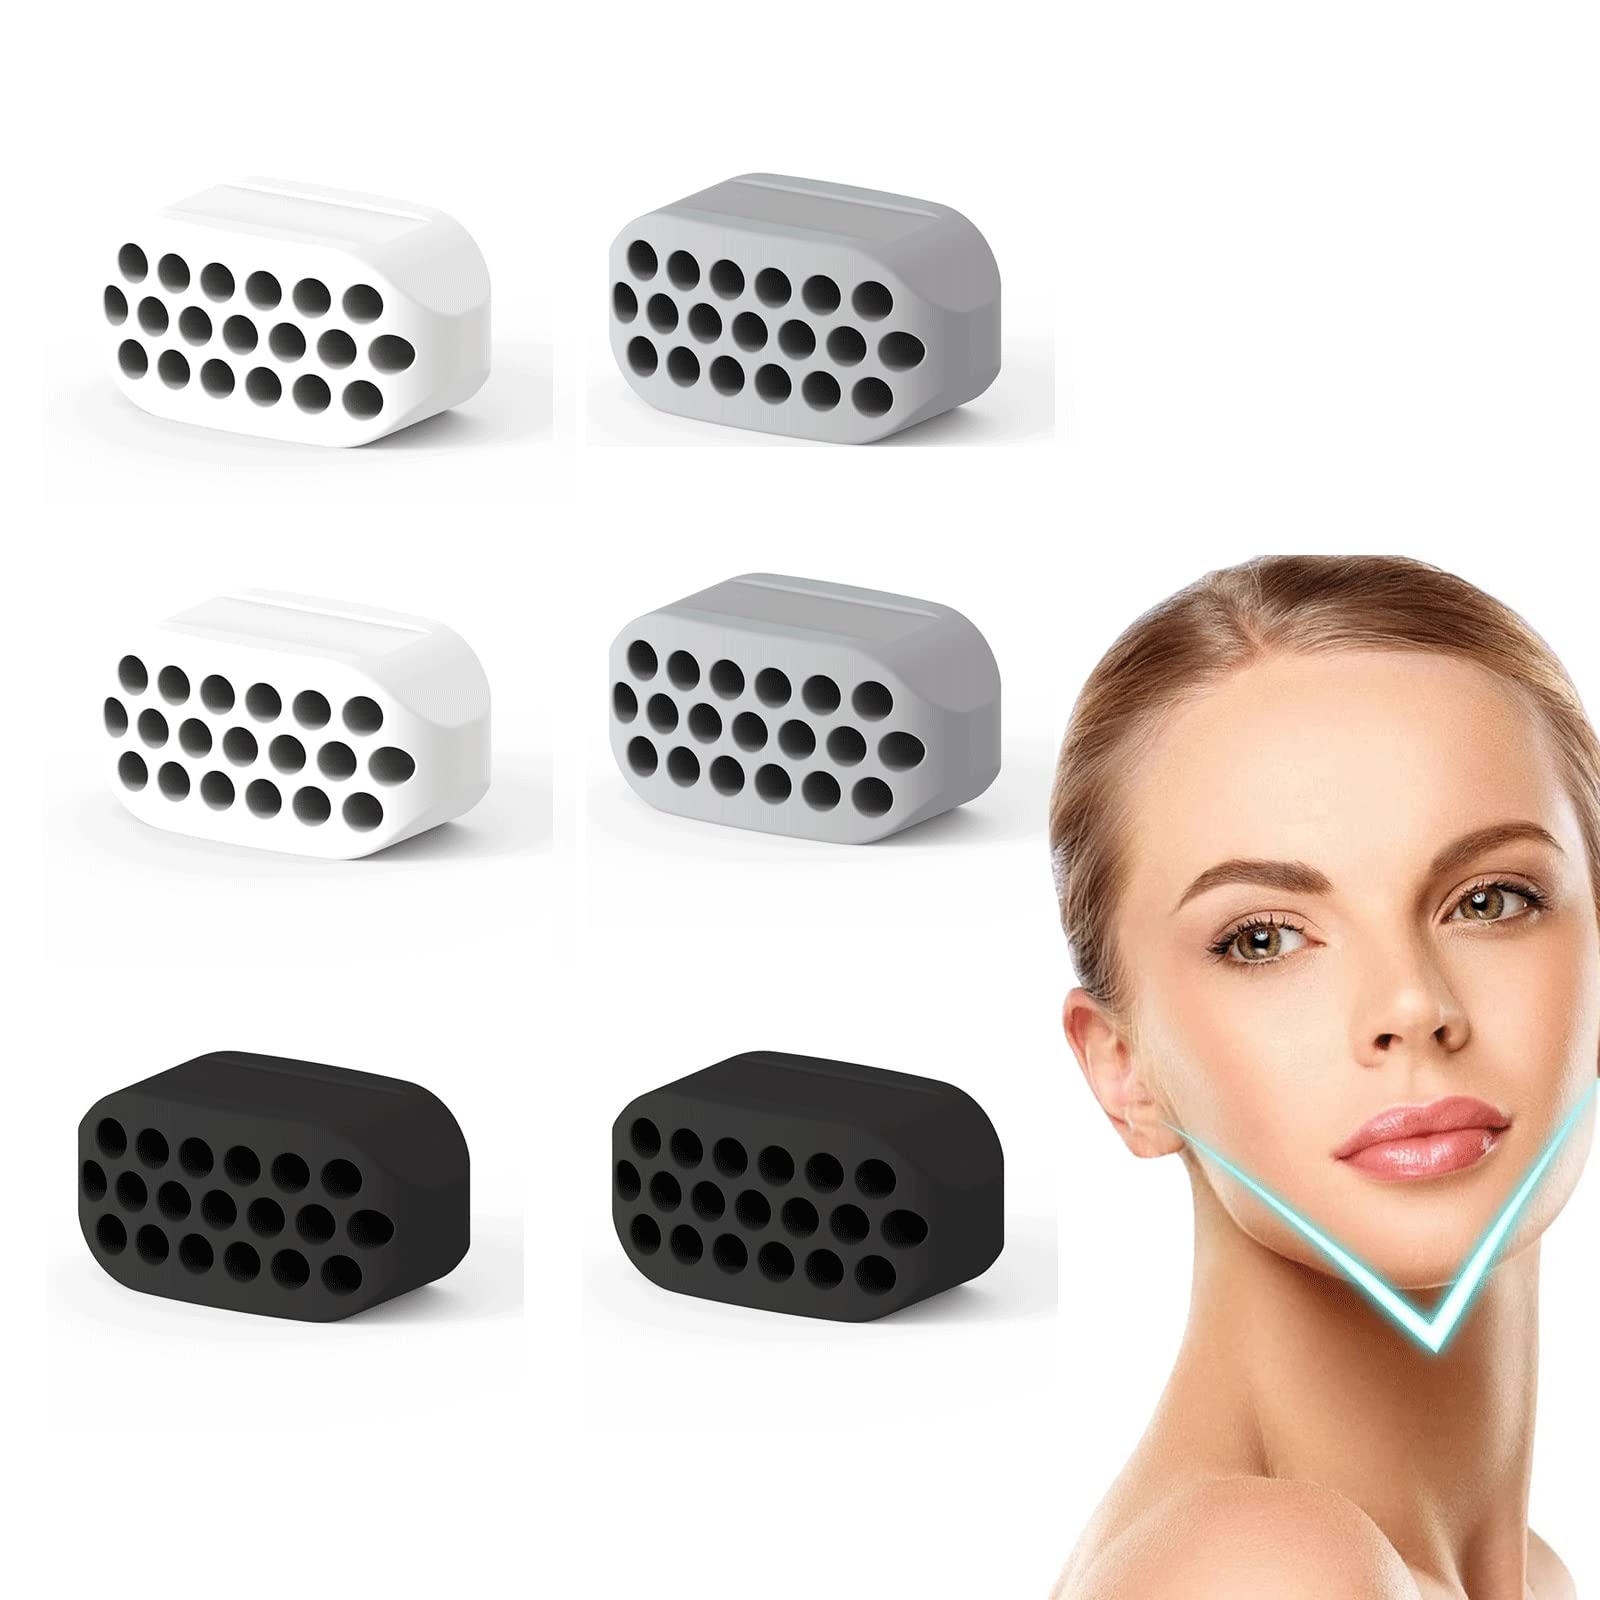  Jaw Exerciser for Men and Women, 6PCS Silicone